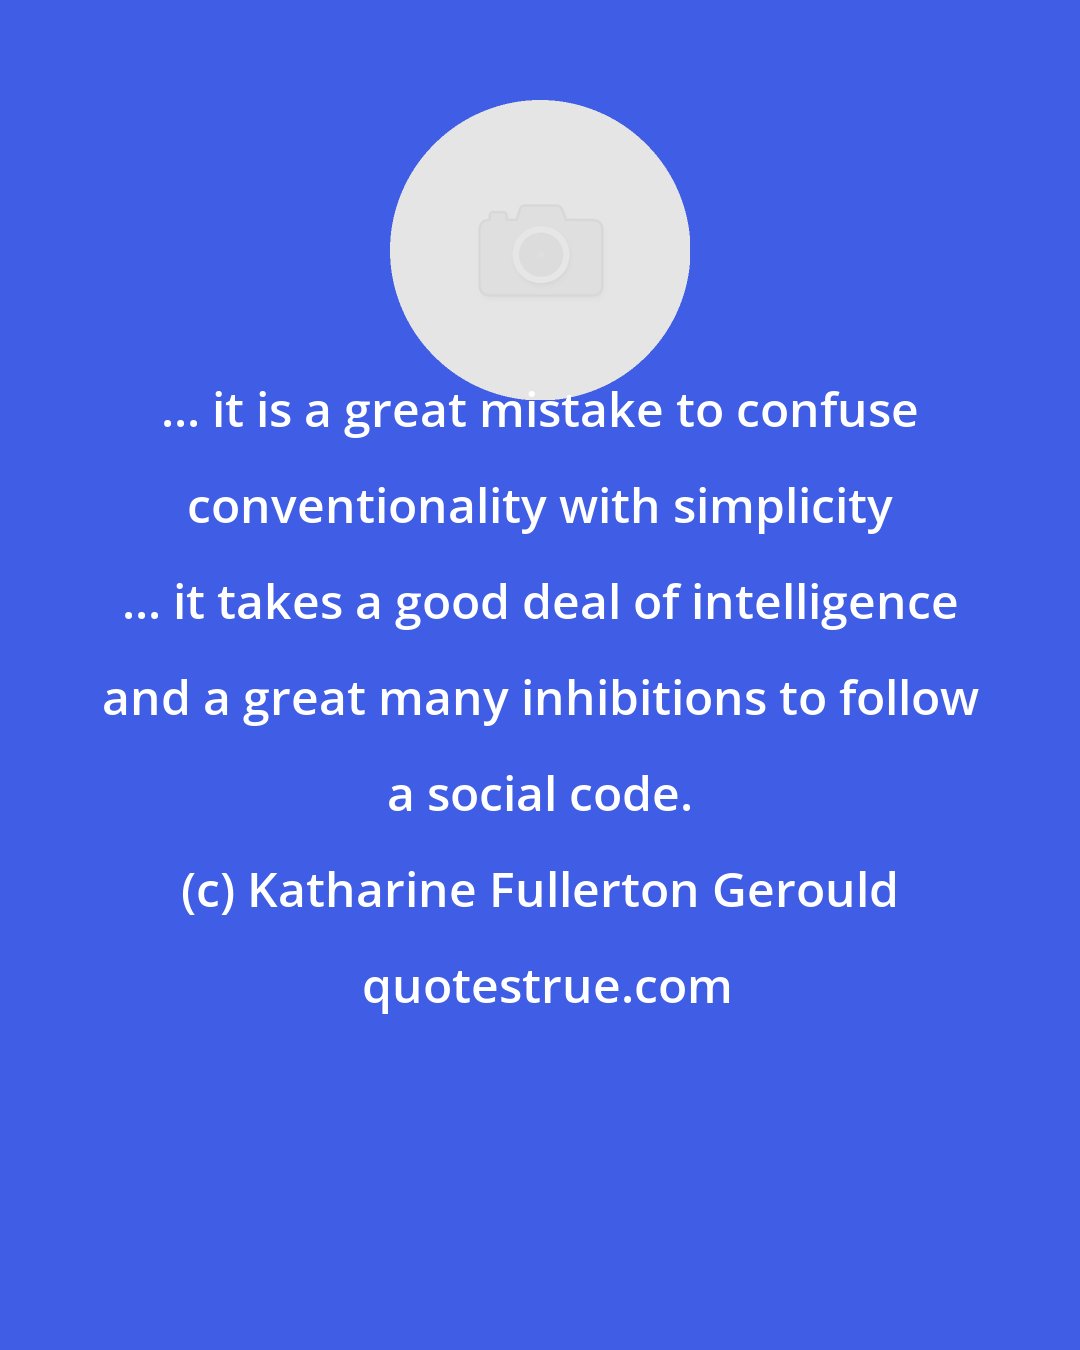 Katharine Fullerton Gerould: ... it is a great mistake to confuse conventionality with simplicity ... it takes a good deal of intelligence and a great many inhibitions to follow a social code.